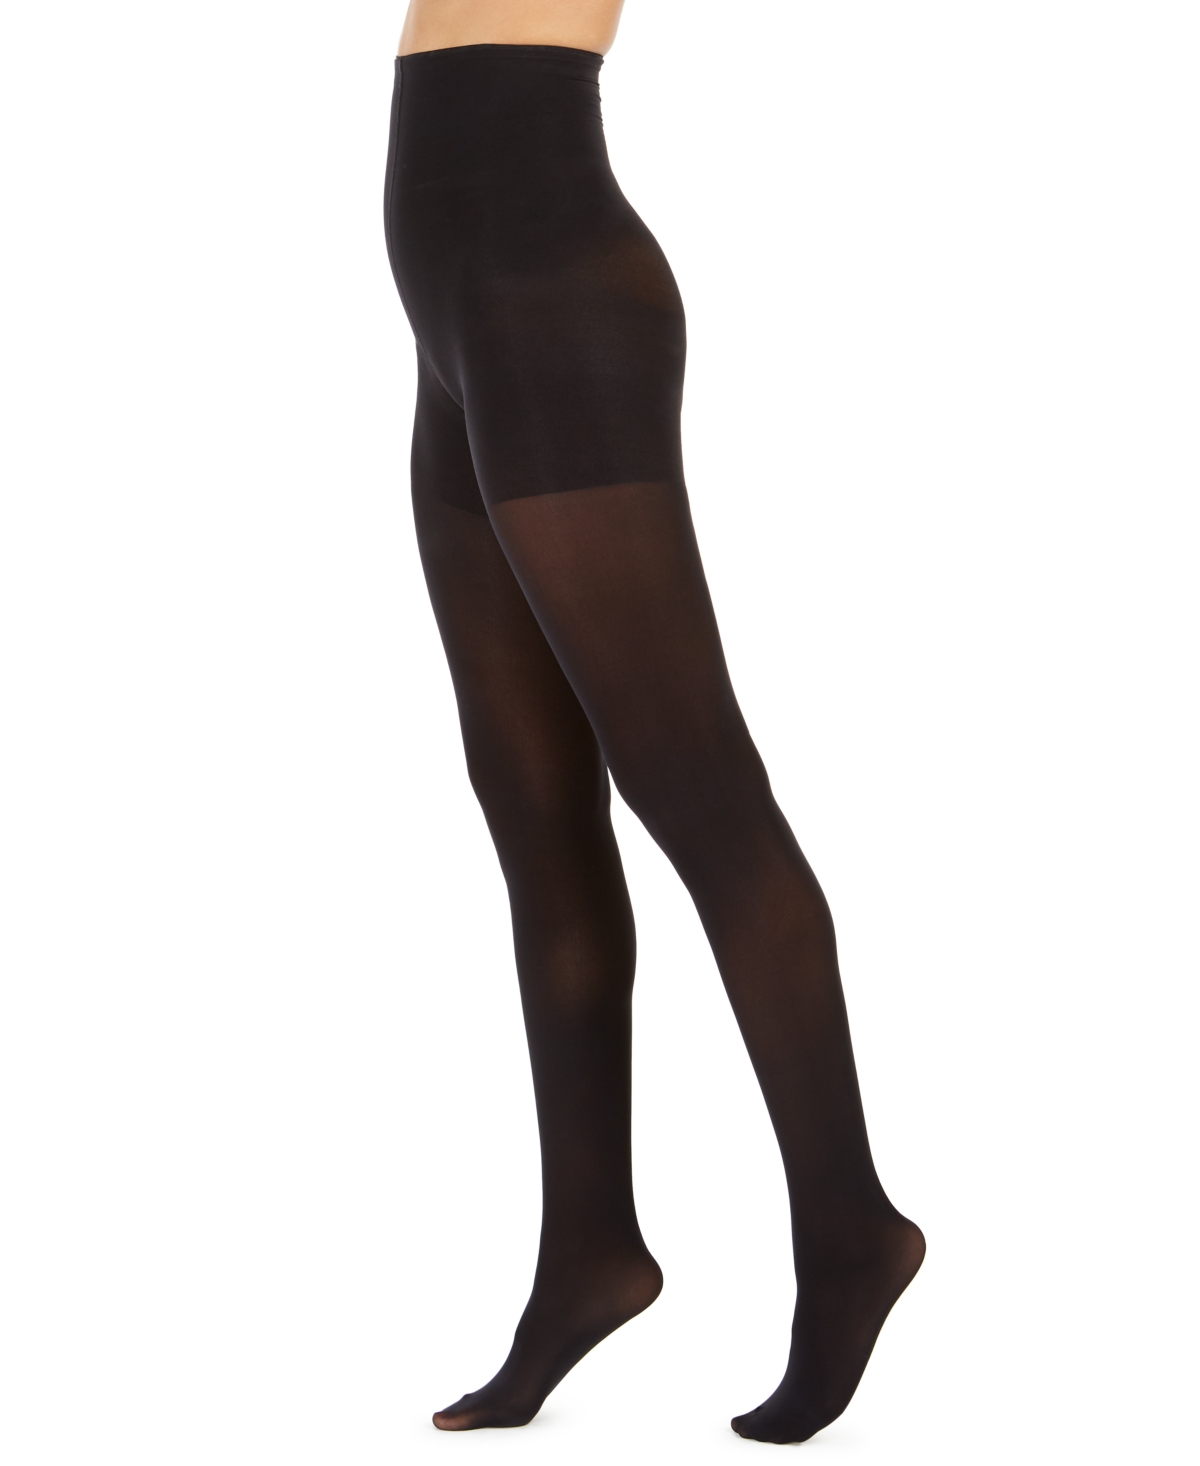 Black High Waisted Tight End Tights by Spanx for $38